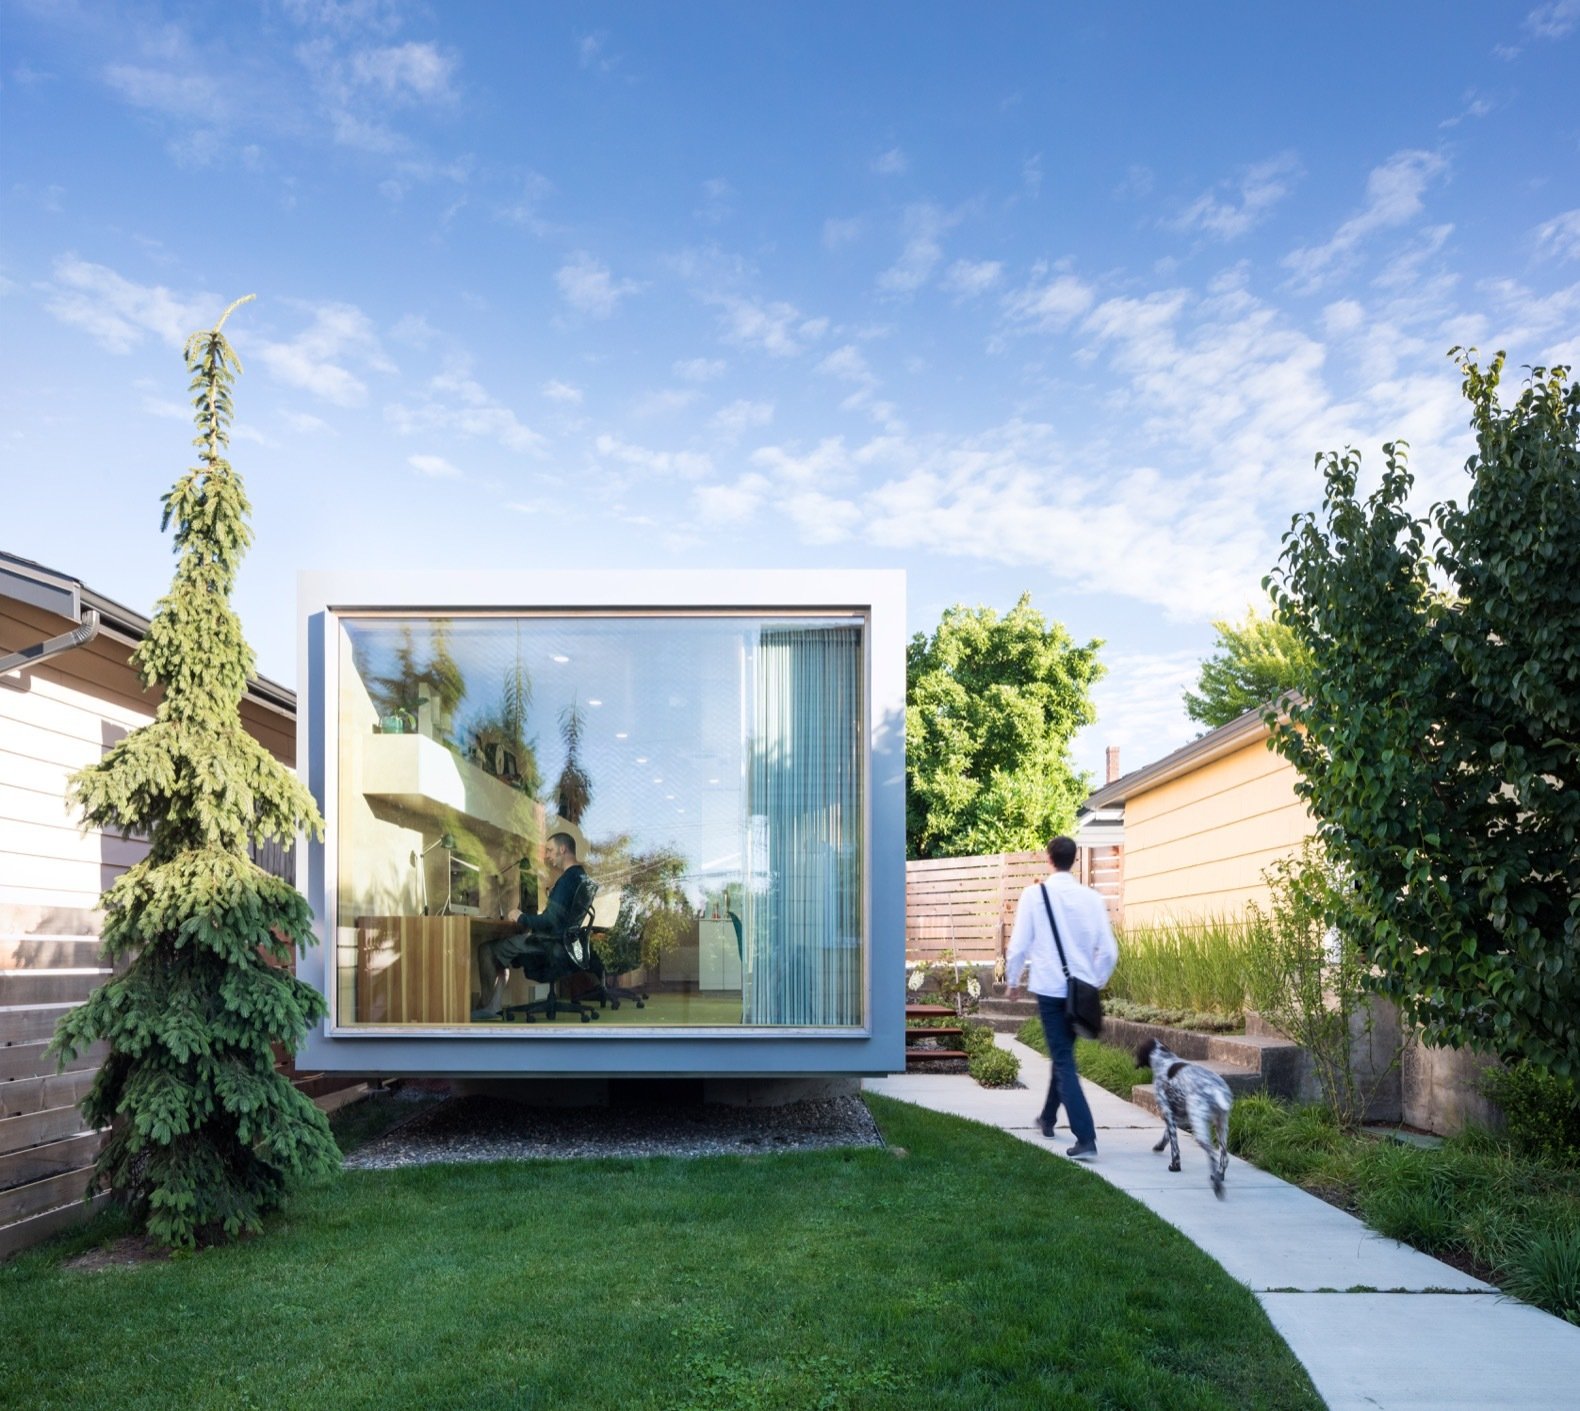 A Shipping Container Turns Into a Backyard Architecture Studio